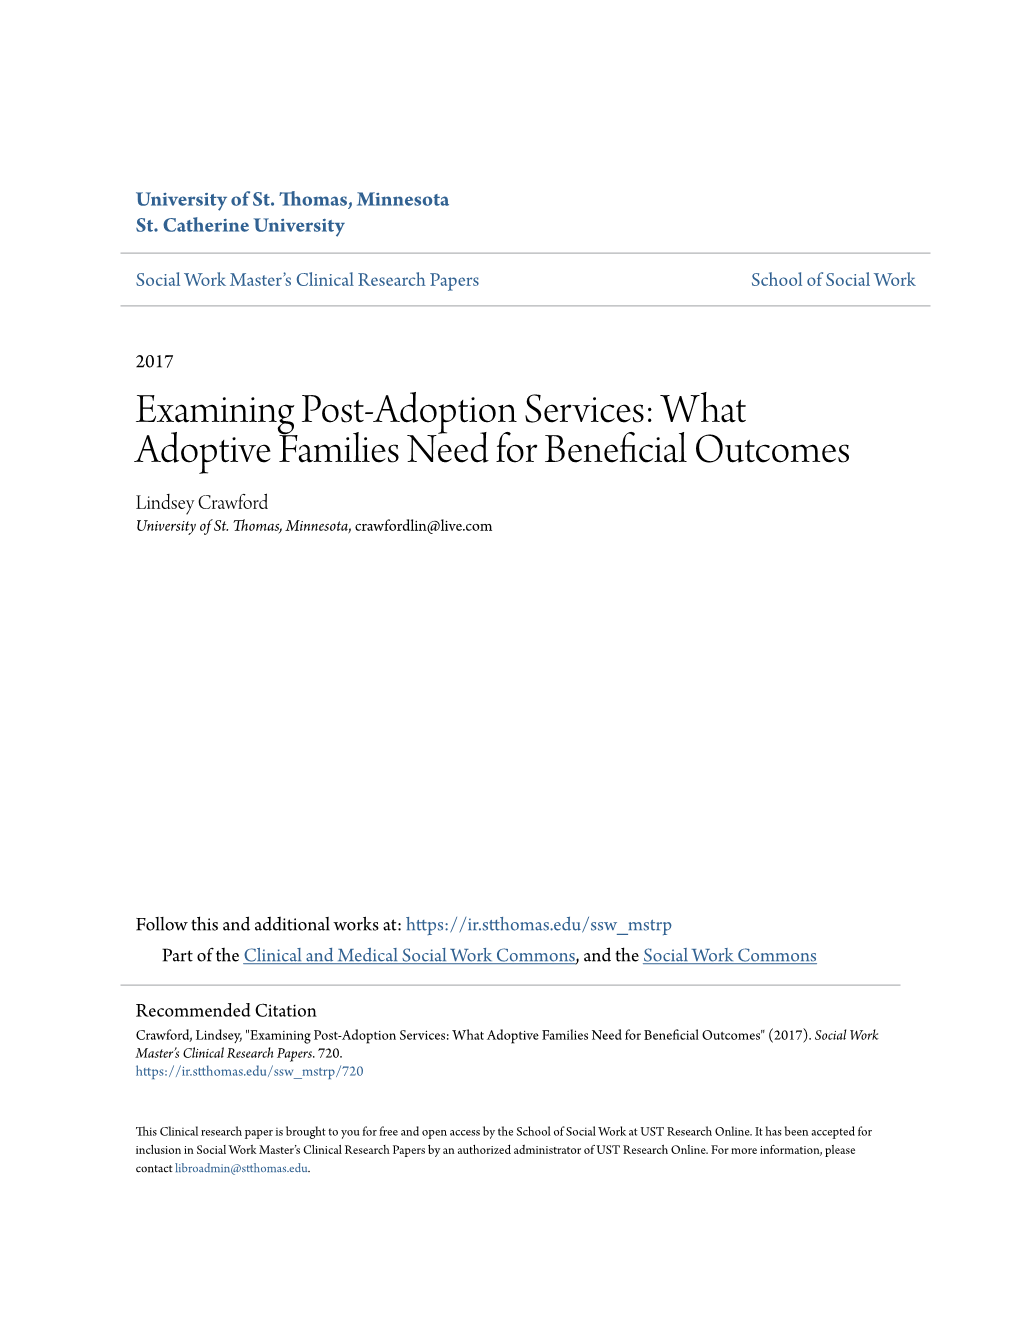 Examining Post-Adoption Services: What Adoptive Families Need for Beneficial Outcomes Lindsey Crawford University of St